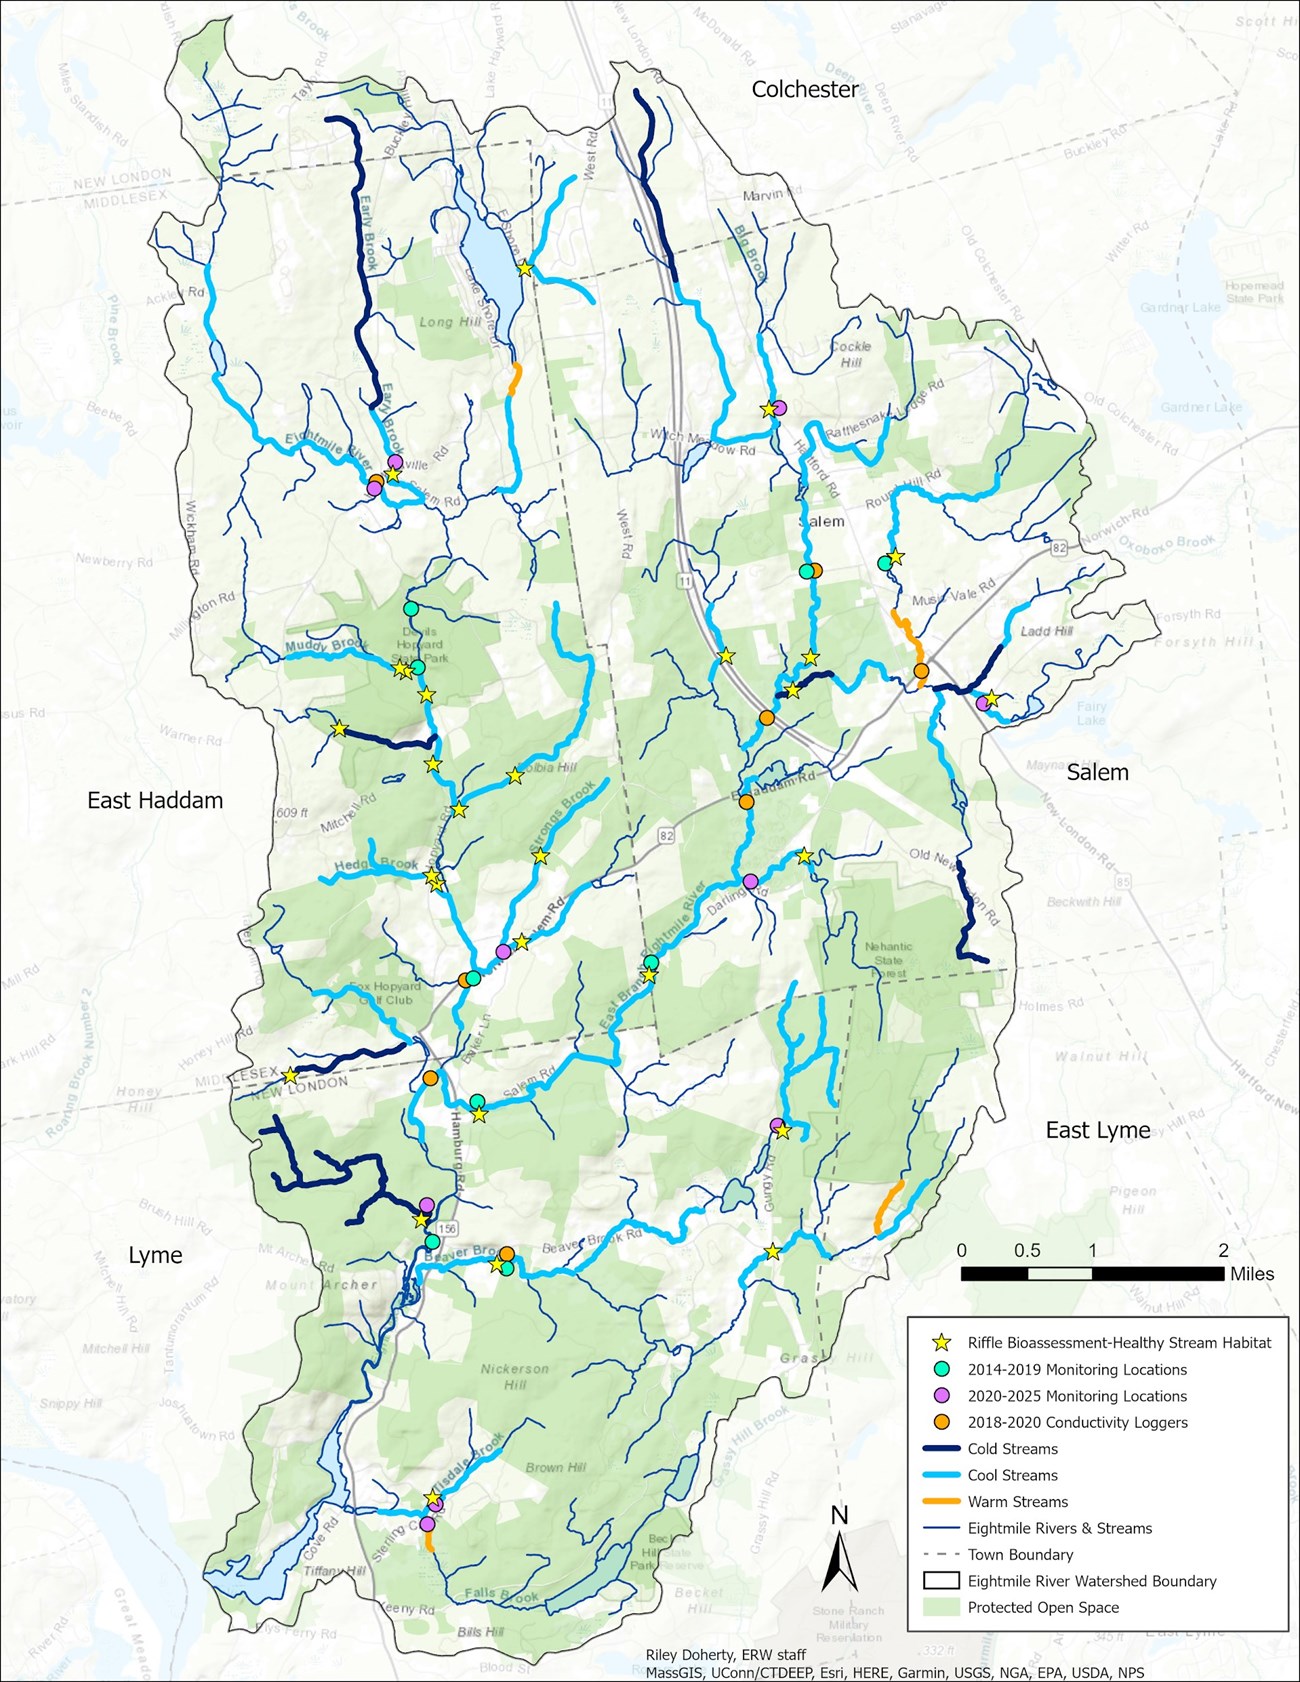 Water quality monitoring map provided by the Eightmile River Wild and Scenic Coordinating Committee.